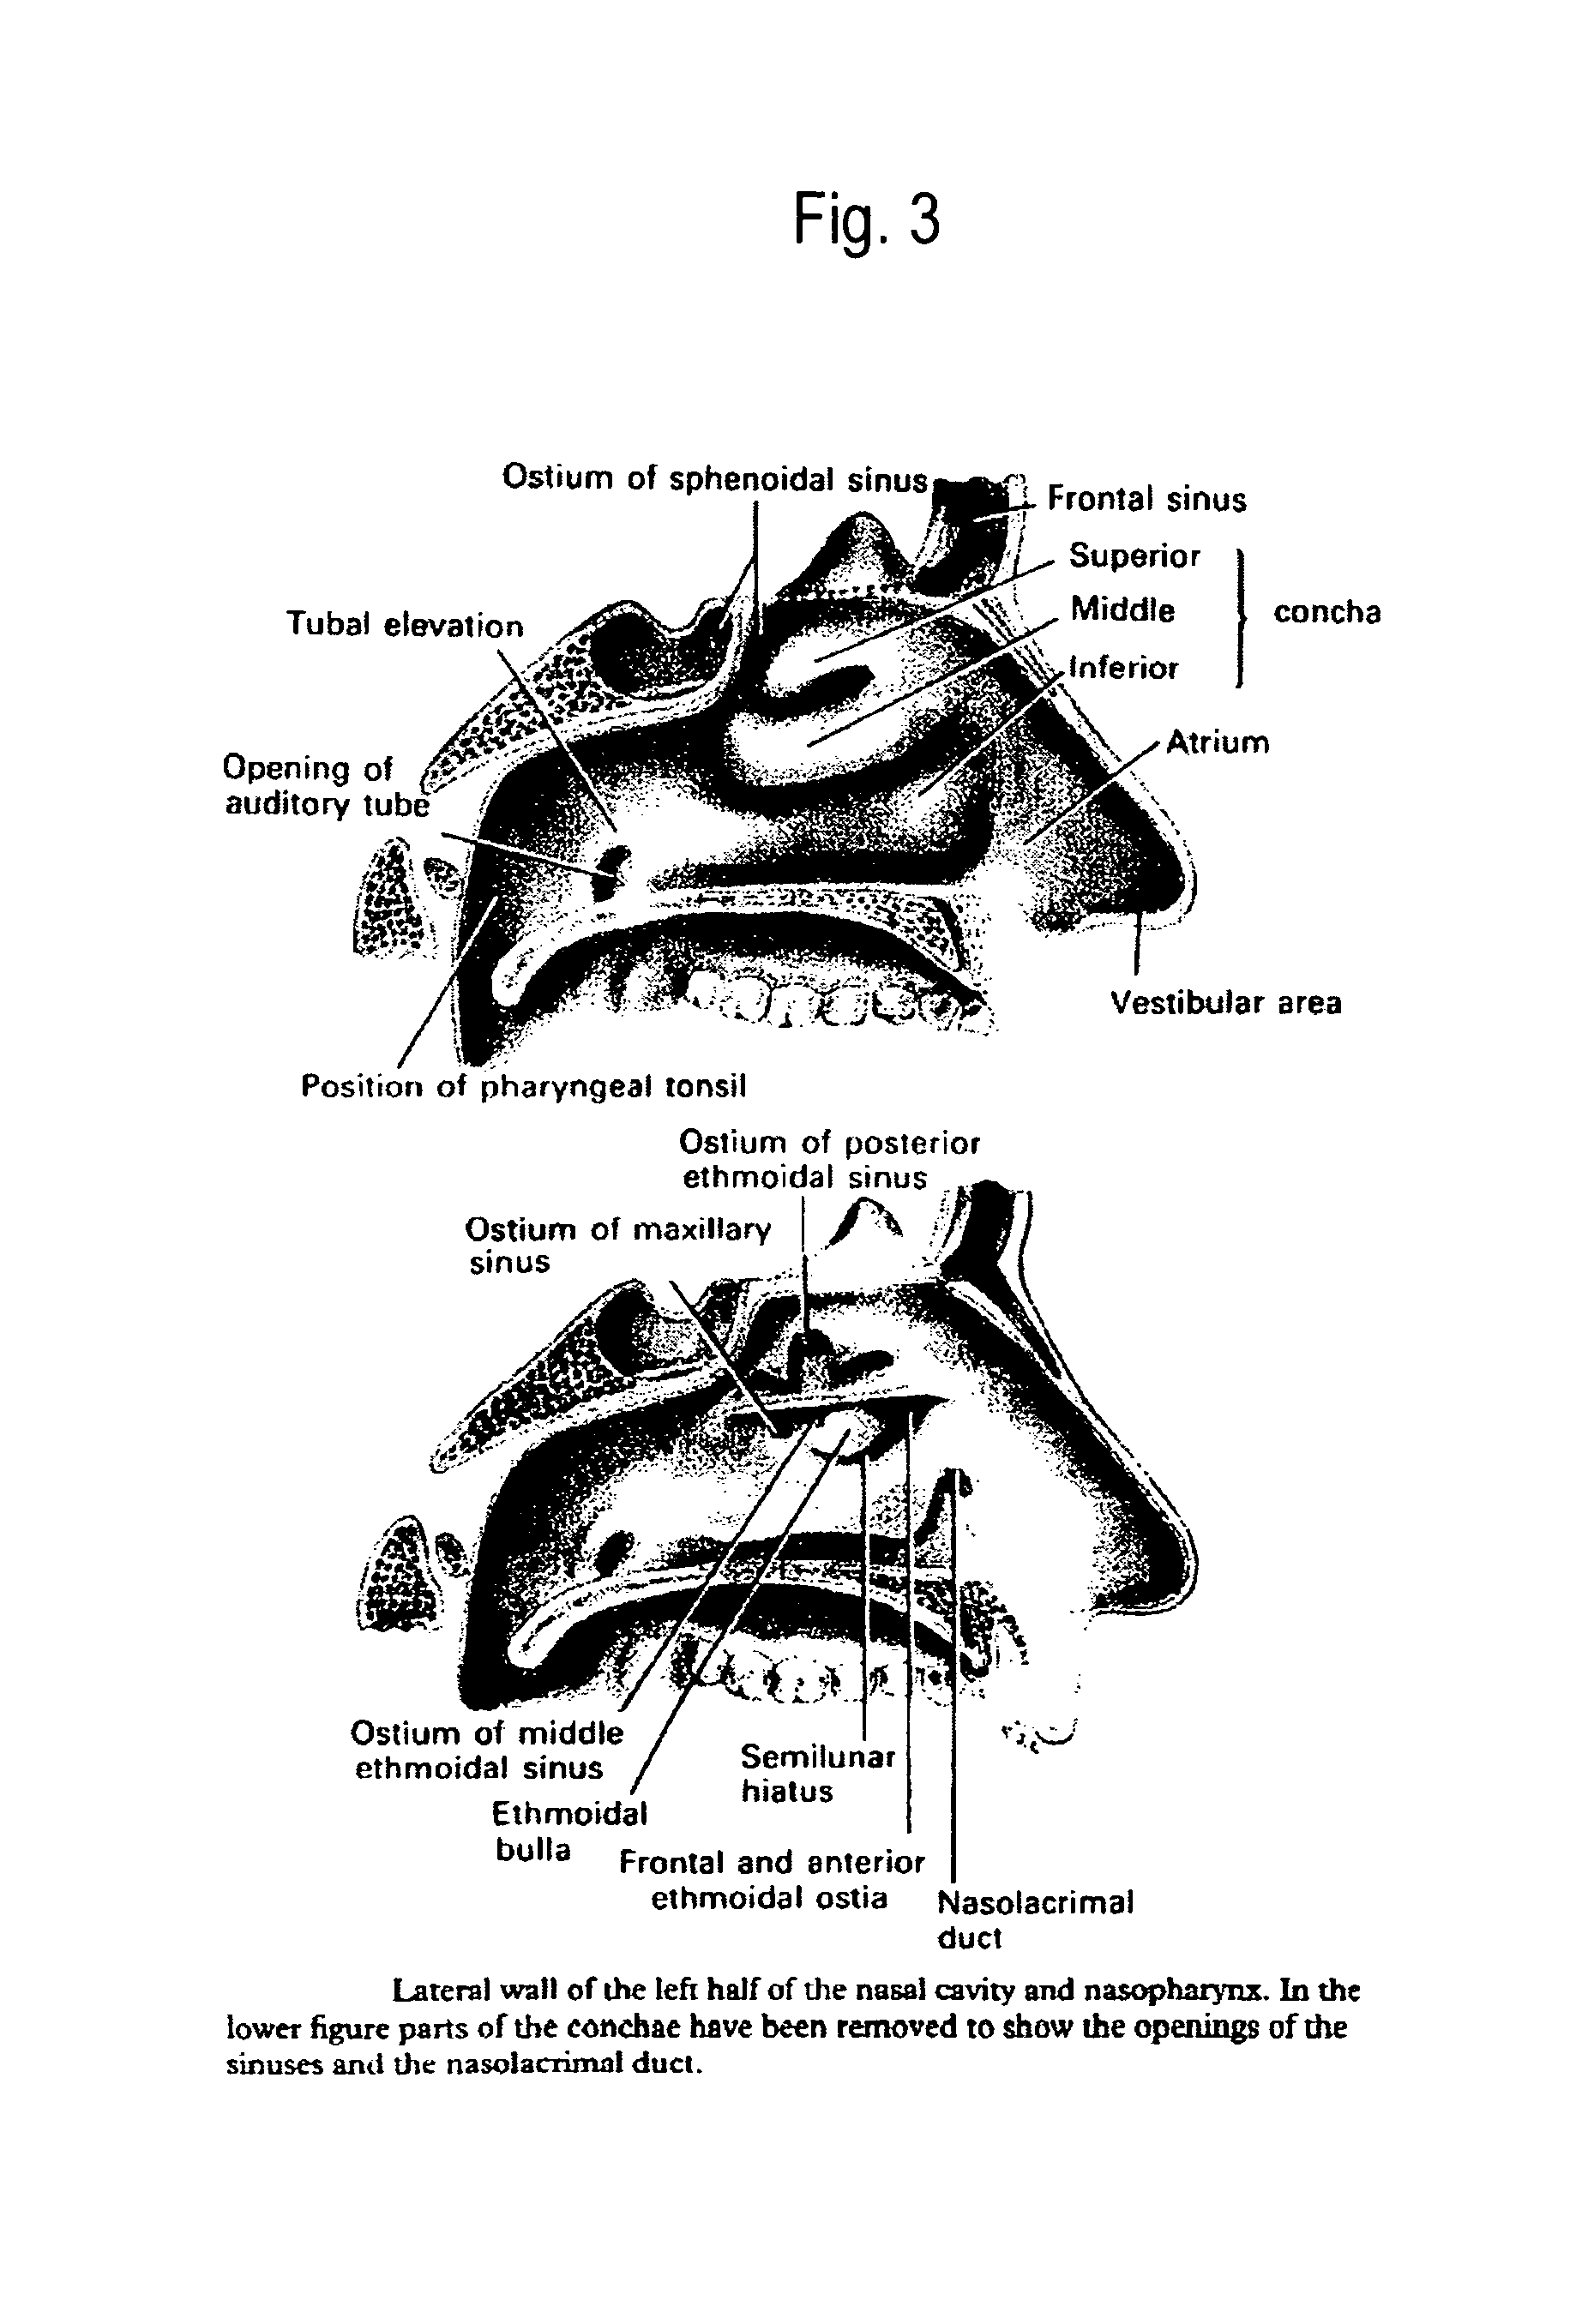 Method of collecting nasopharyngeal cells and secretions for diagnosis of viral upper respiratory infections and screening for nasopharyngeal cancer